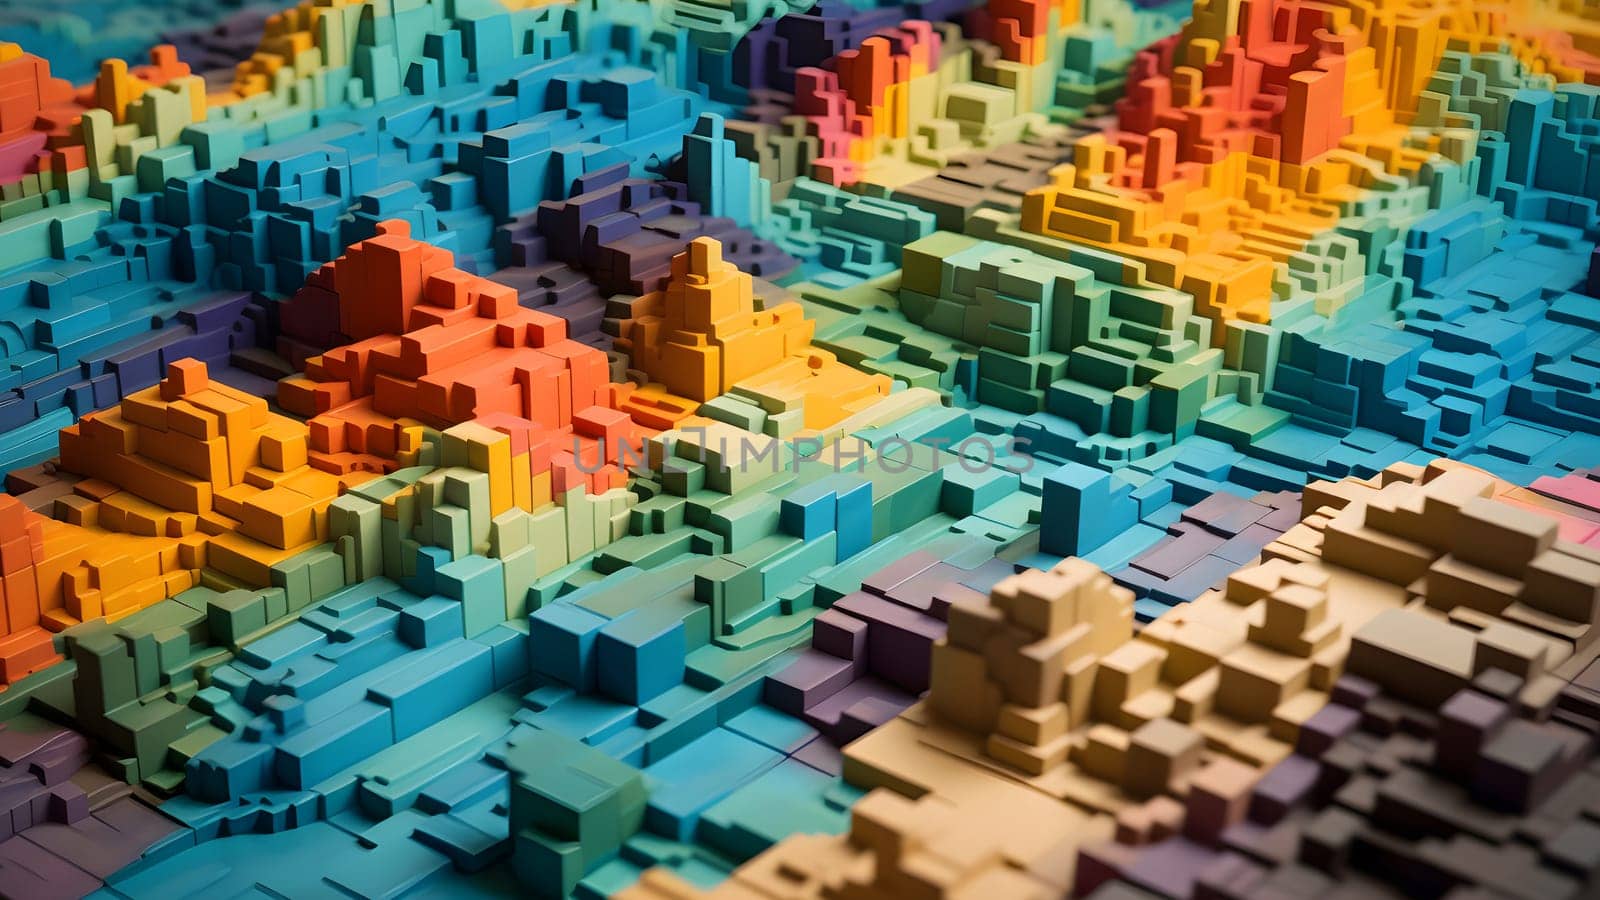 abstract topographic landscape model based on small colorful cubes, neural network generated art by z1b